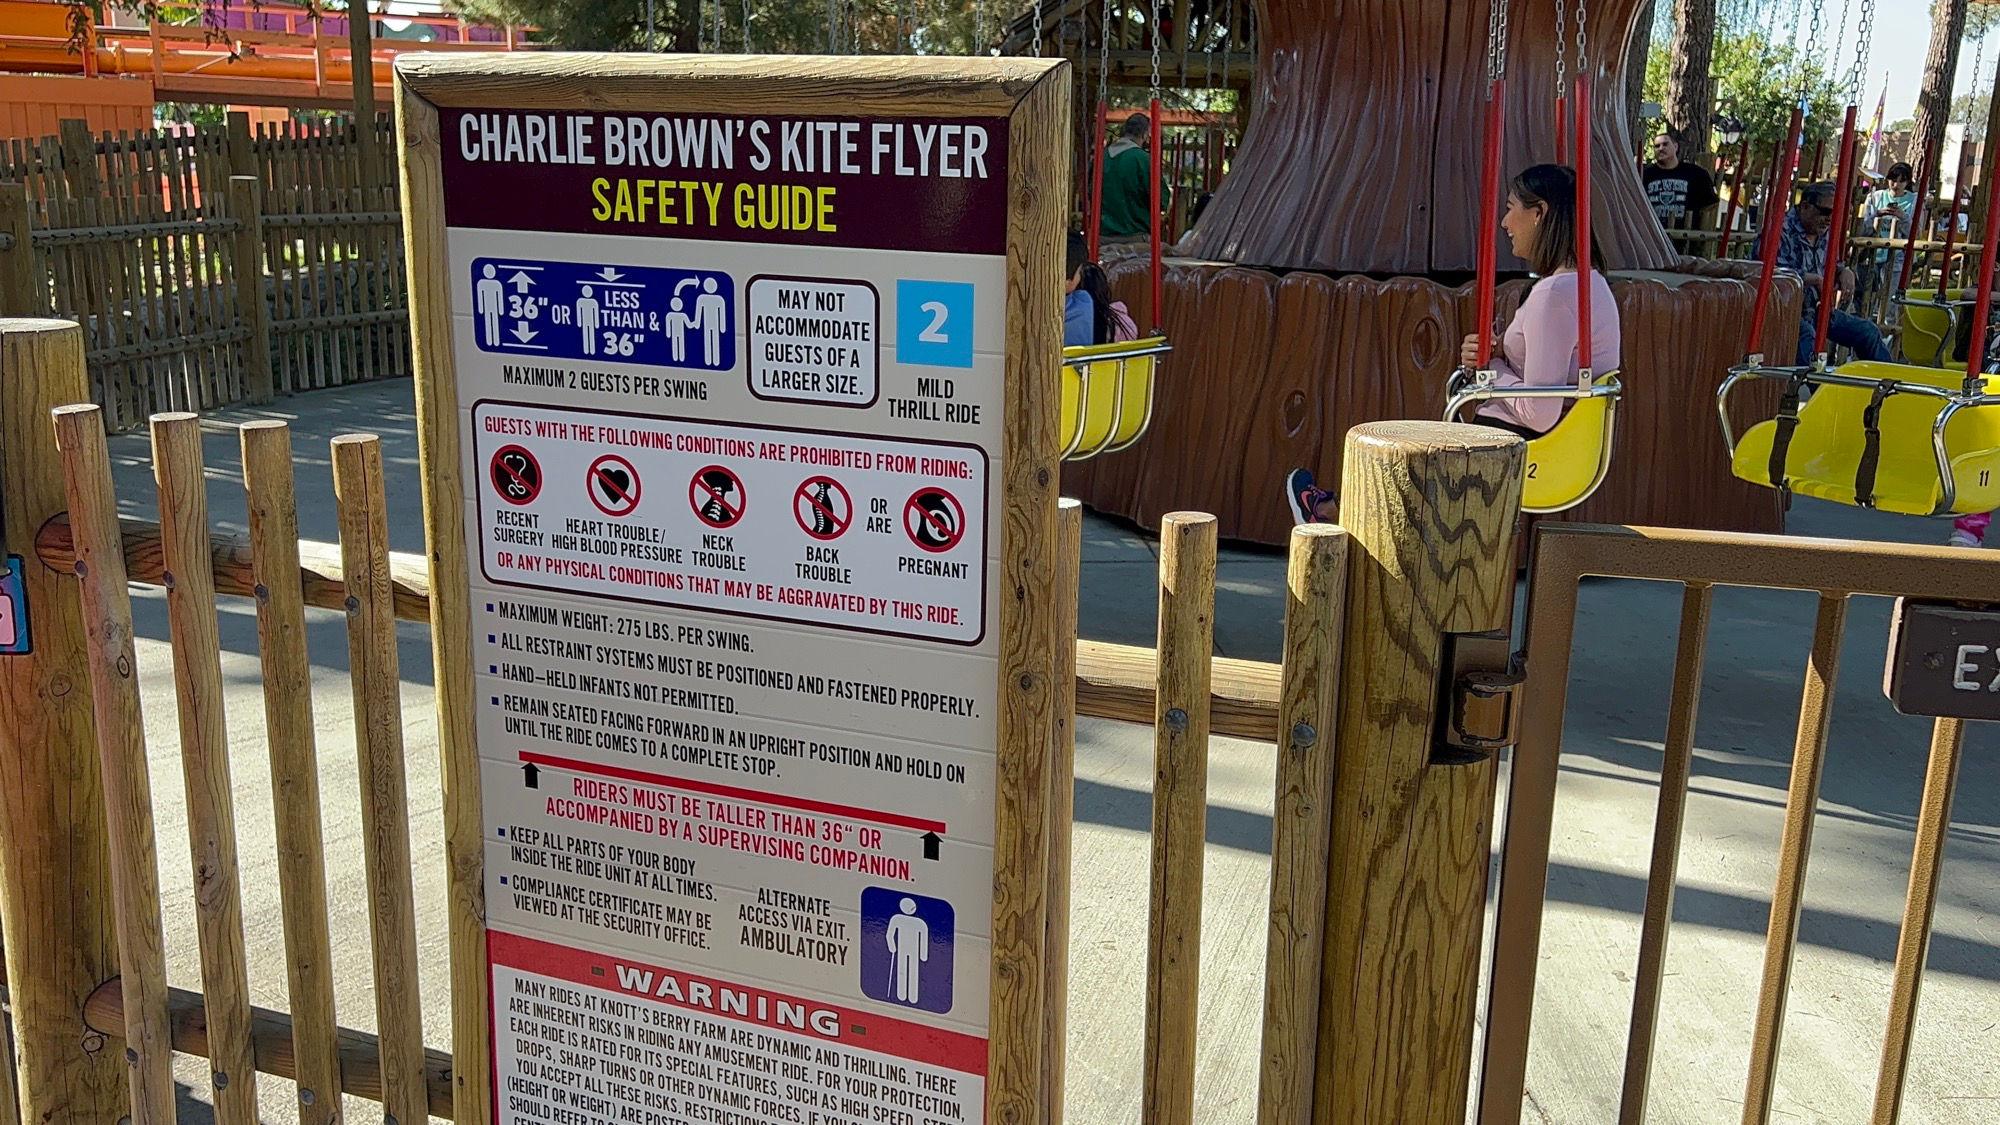 Charlie Brown's Kite Flyer Safety Guide